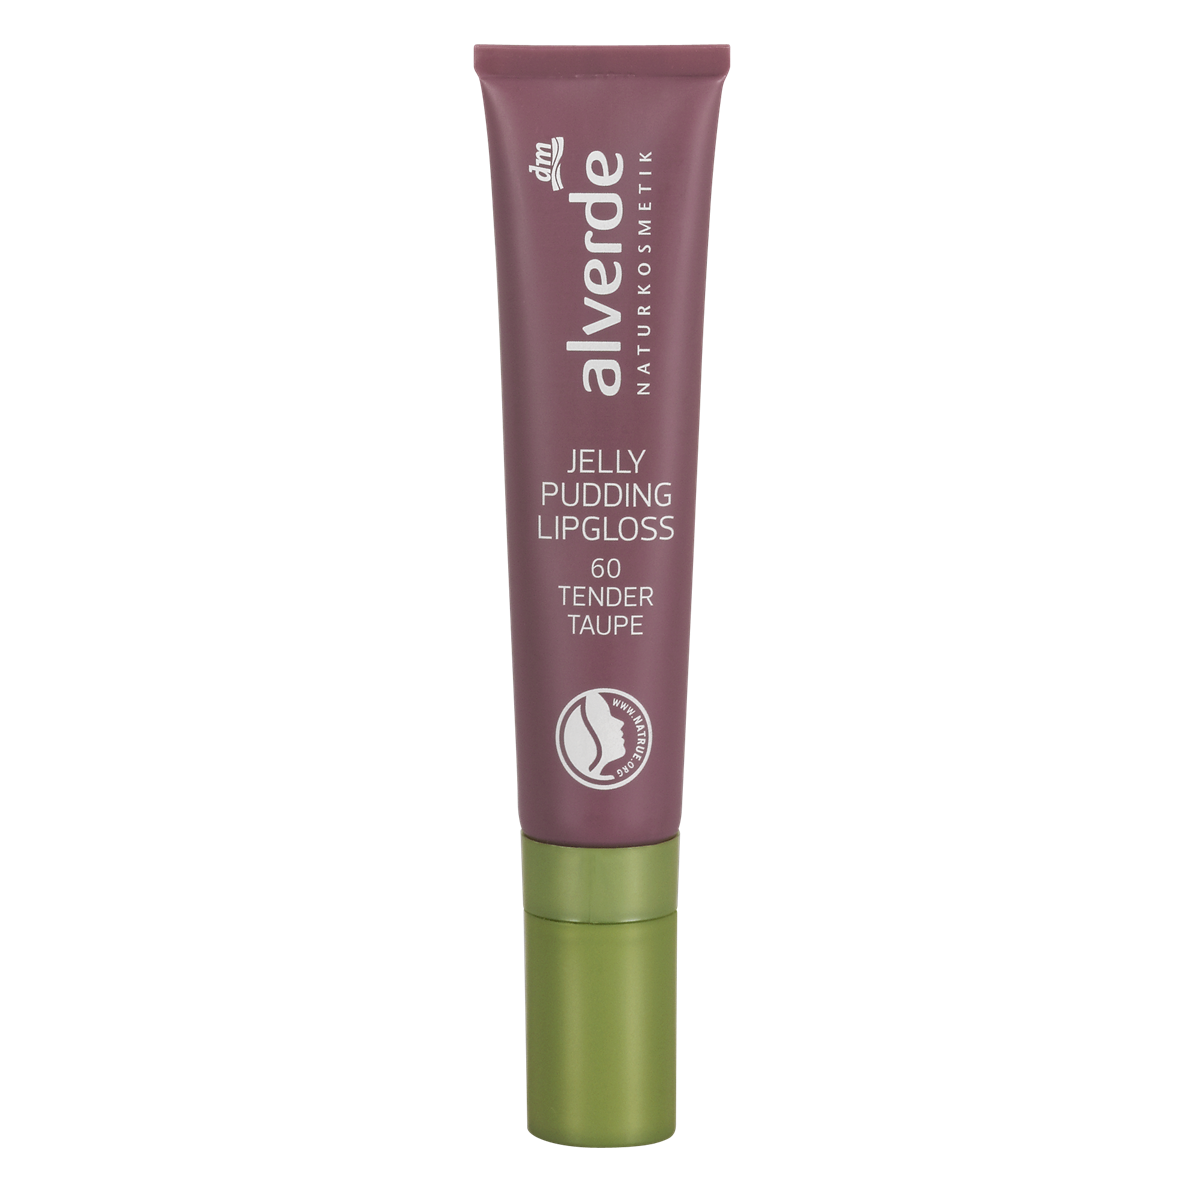 alverde Jelly Pudding Lipgloss - Nr. 60 Tender Taupe 10 ml, 3,25 €